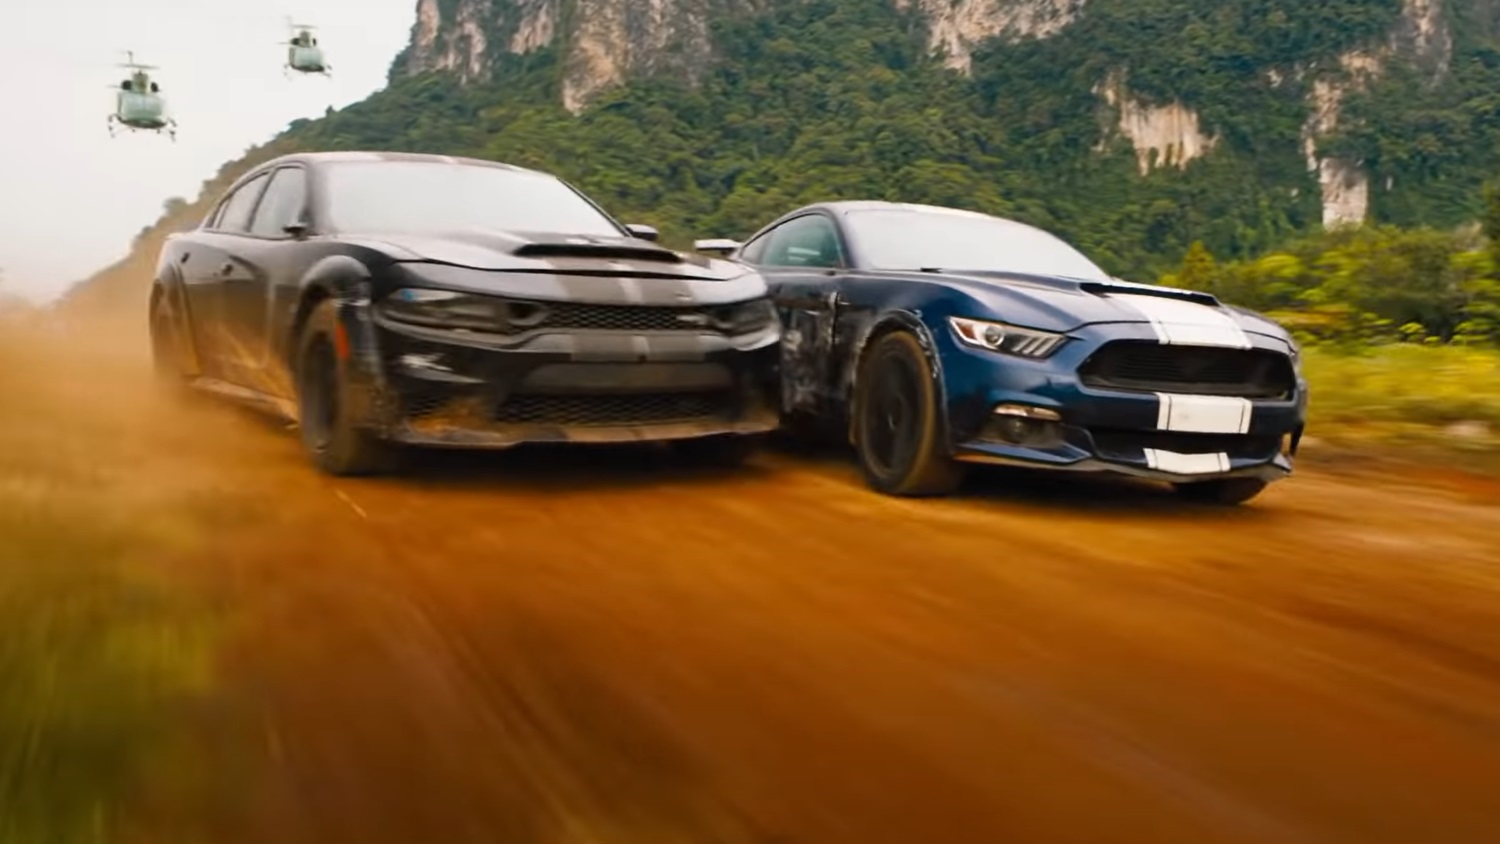 Voiture De Fast And Furious 9 Fast & Furious 9 Trailer Stars Ford Mustang Hitching Ride On Jet: Video